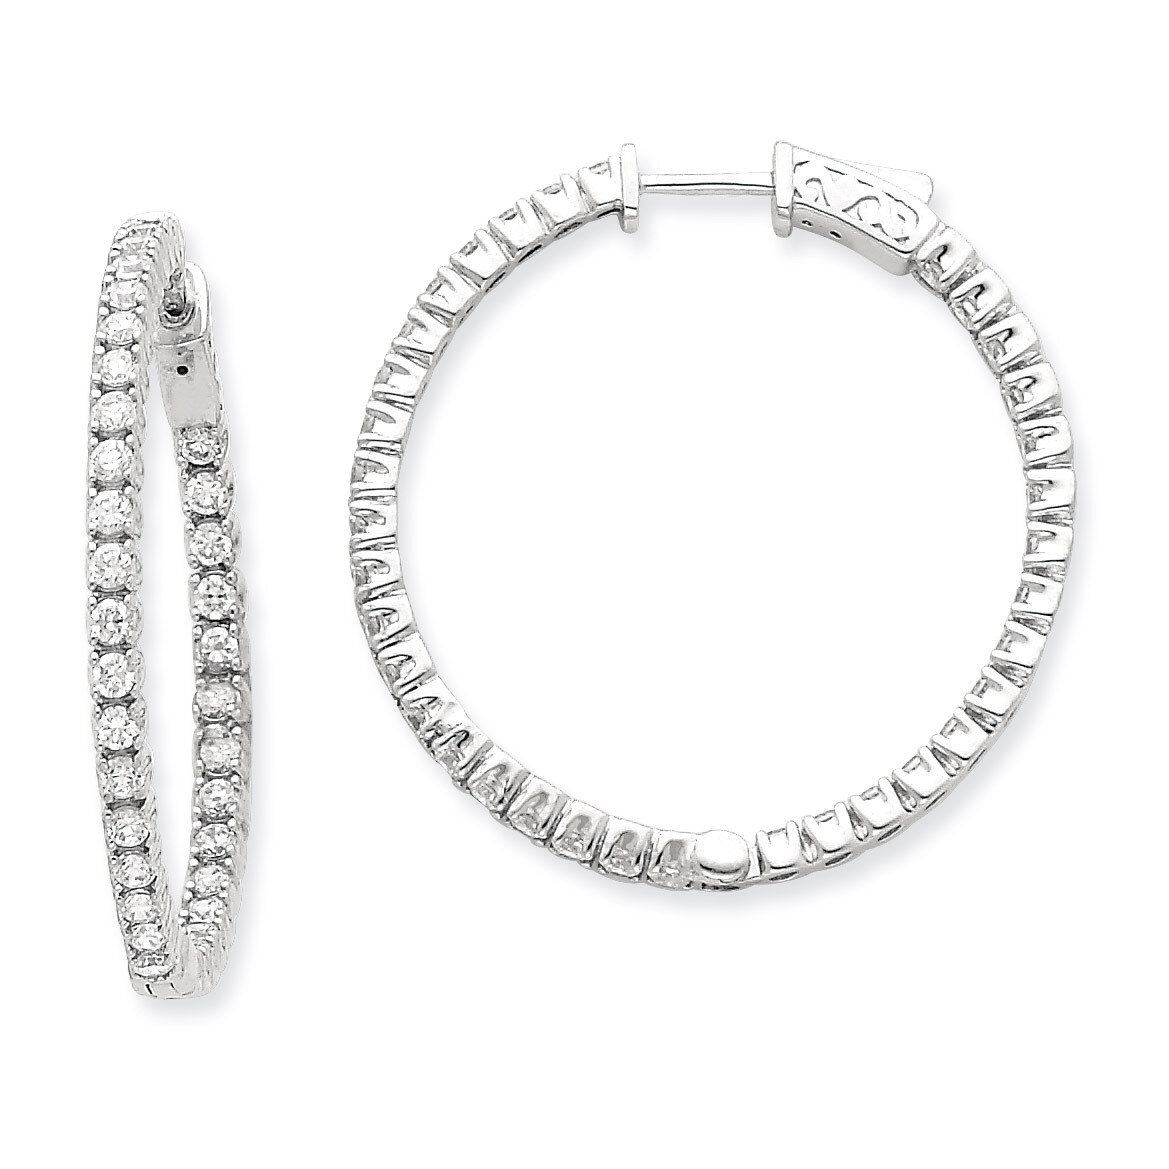 Diamond Round Hoop with Safety Clasp Earrings 14k White Gold XE1989WAA